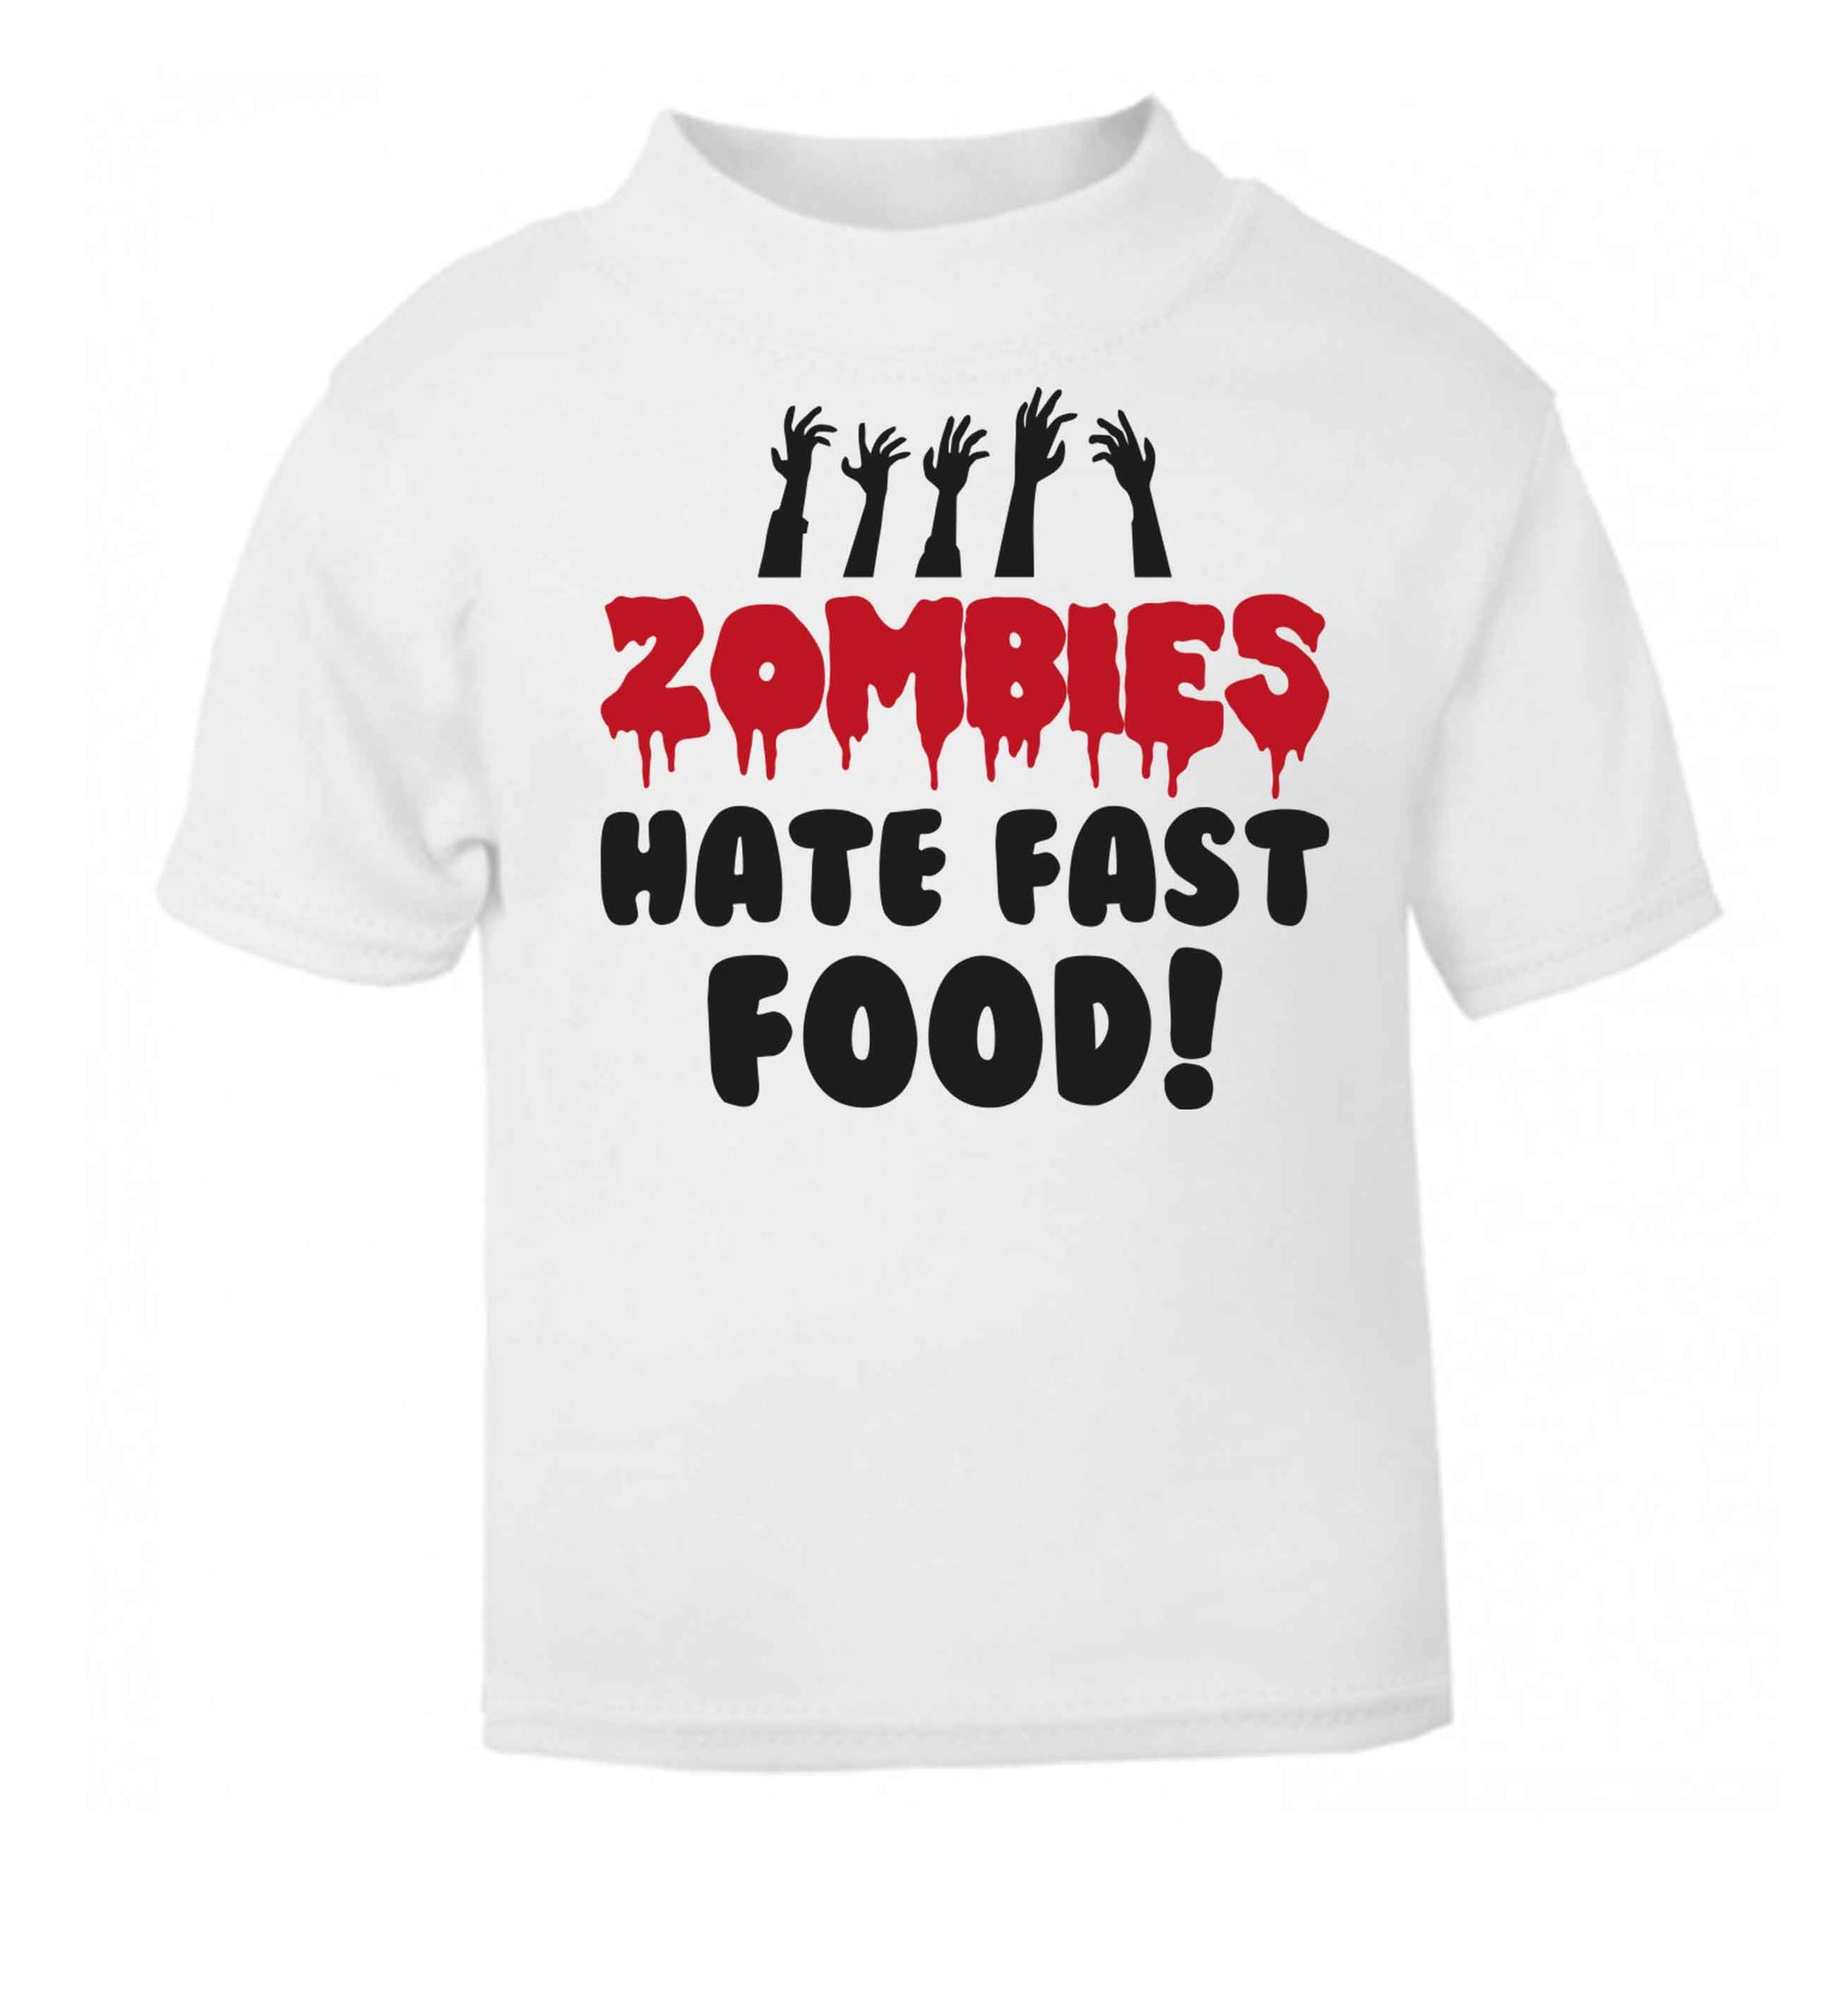 Zombies hate fast food white baby toddler Tshirt 2 Years